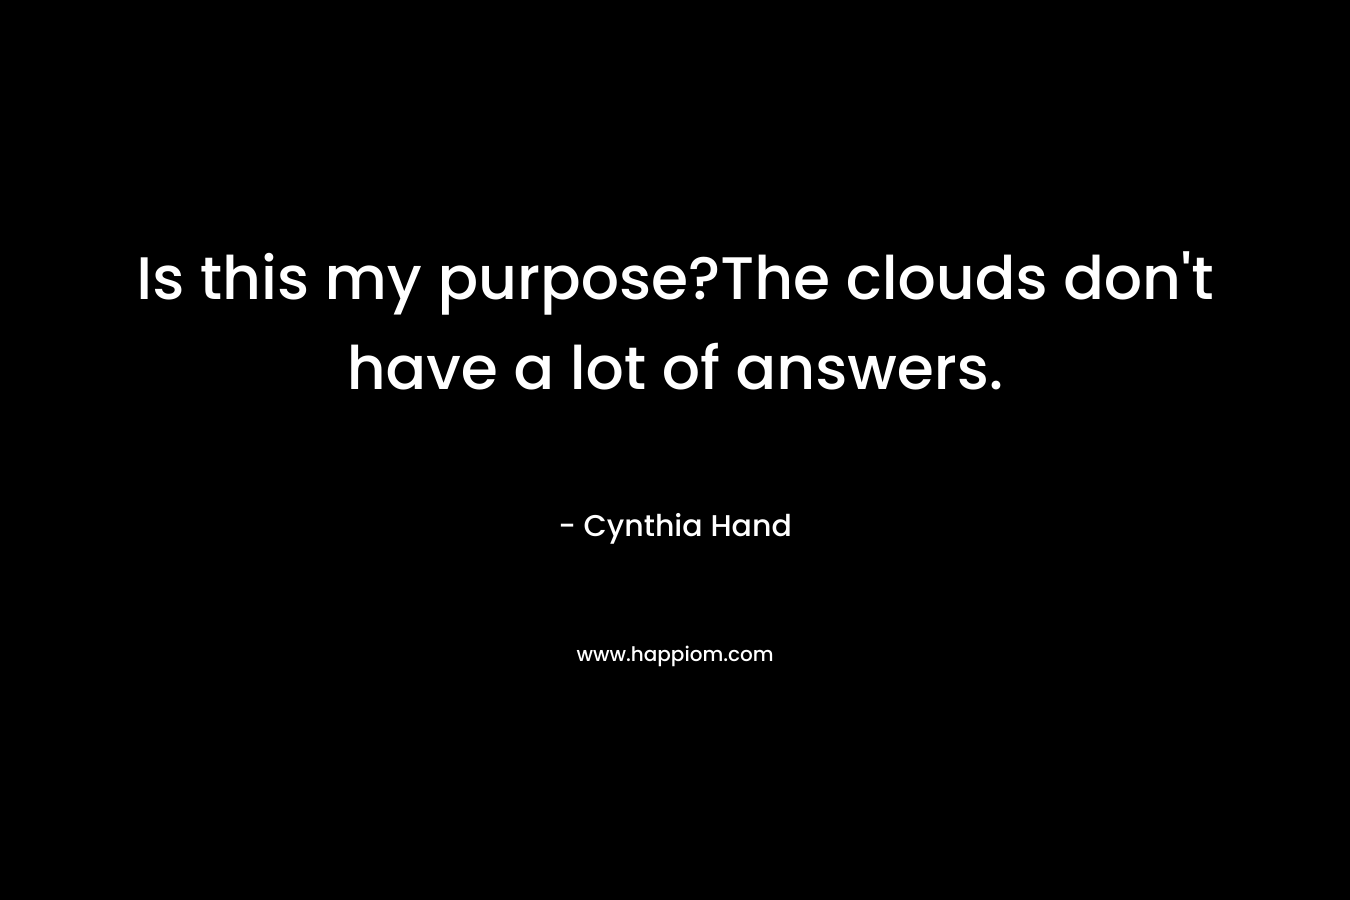 Is this my purpose?The clouds don’t have a lot of answers. – Cynthia Hand